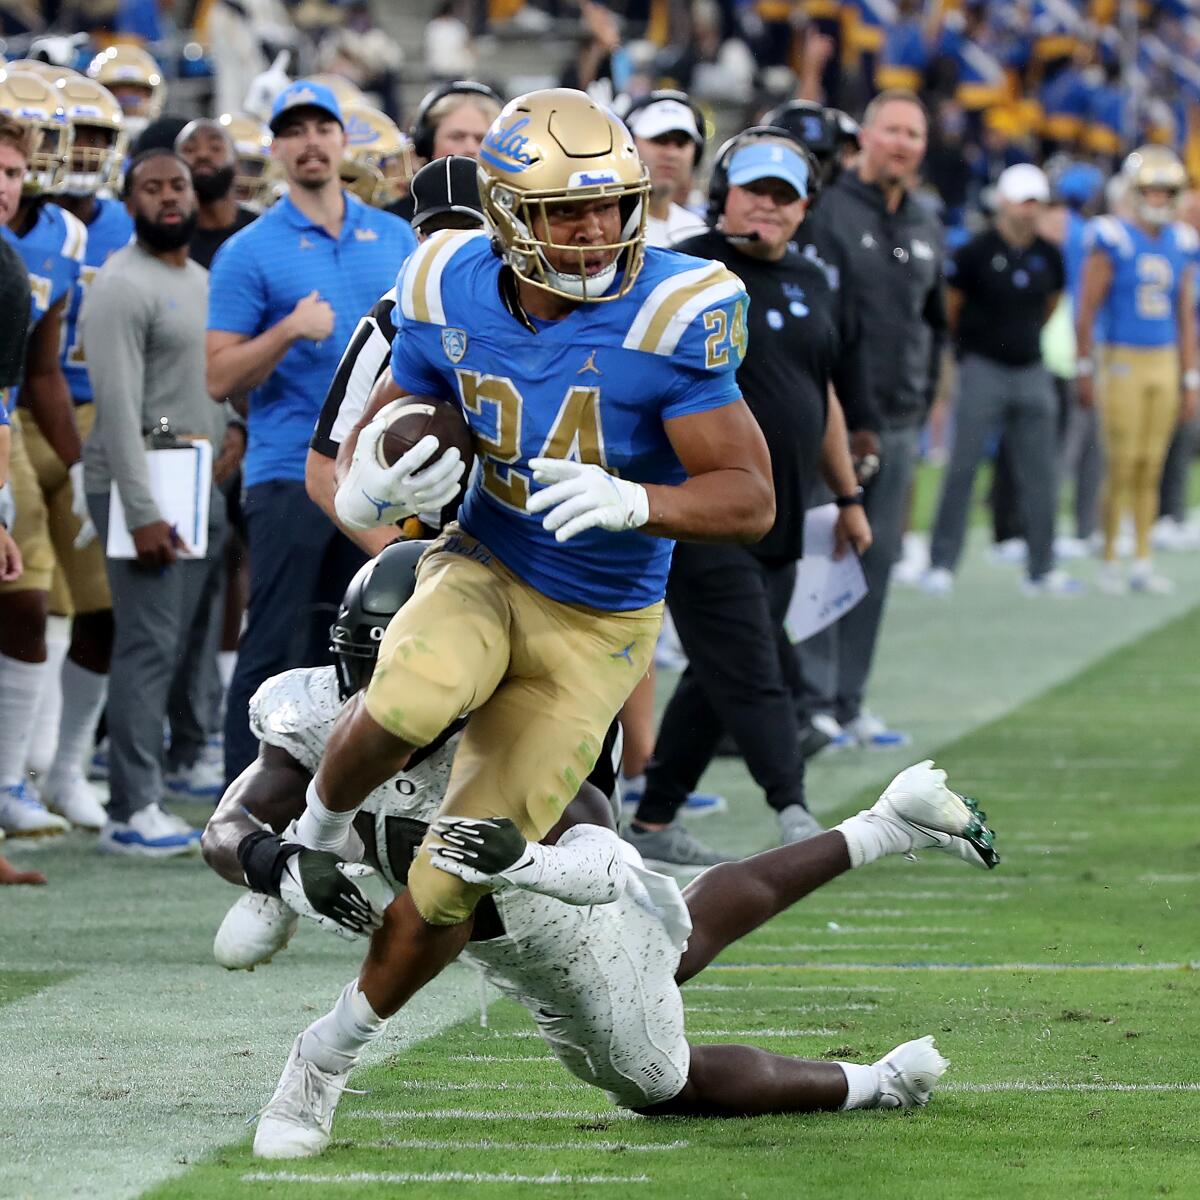 UCLA running back Zach Charbonnet makes a long gain along the sideline.